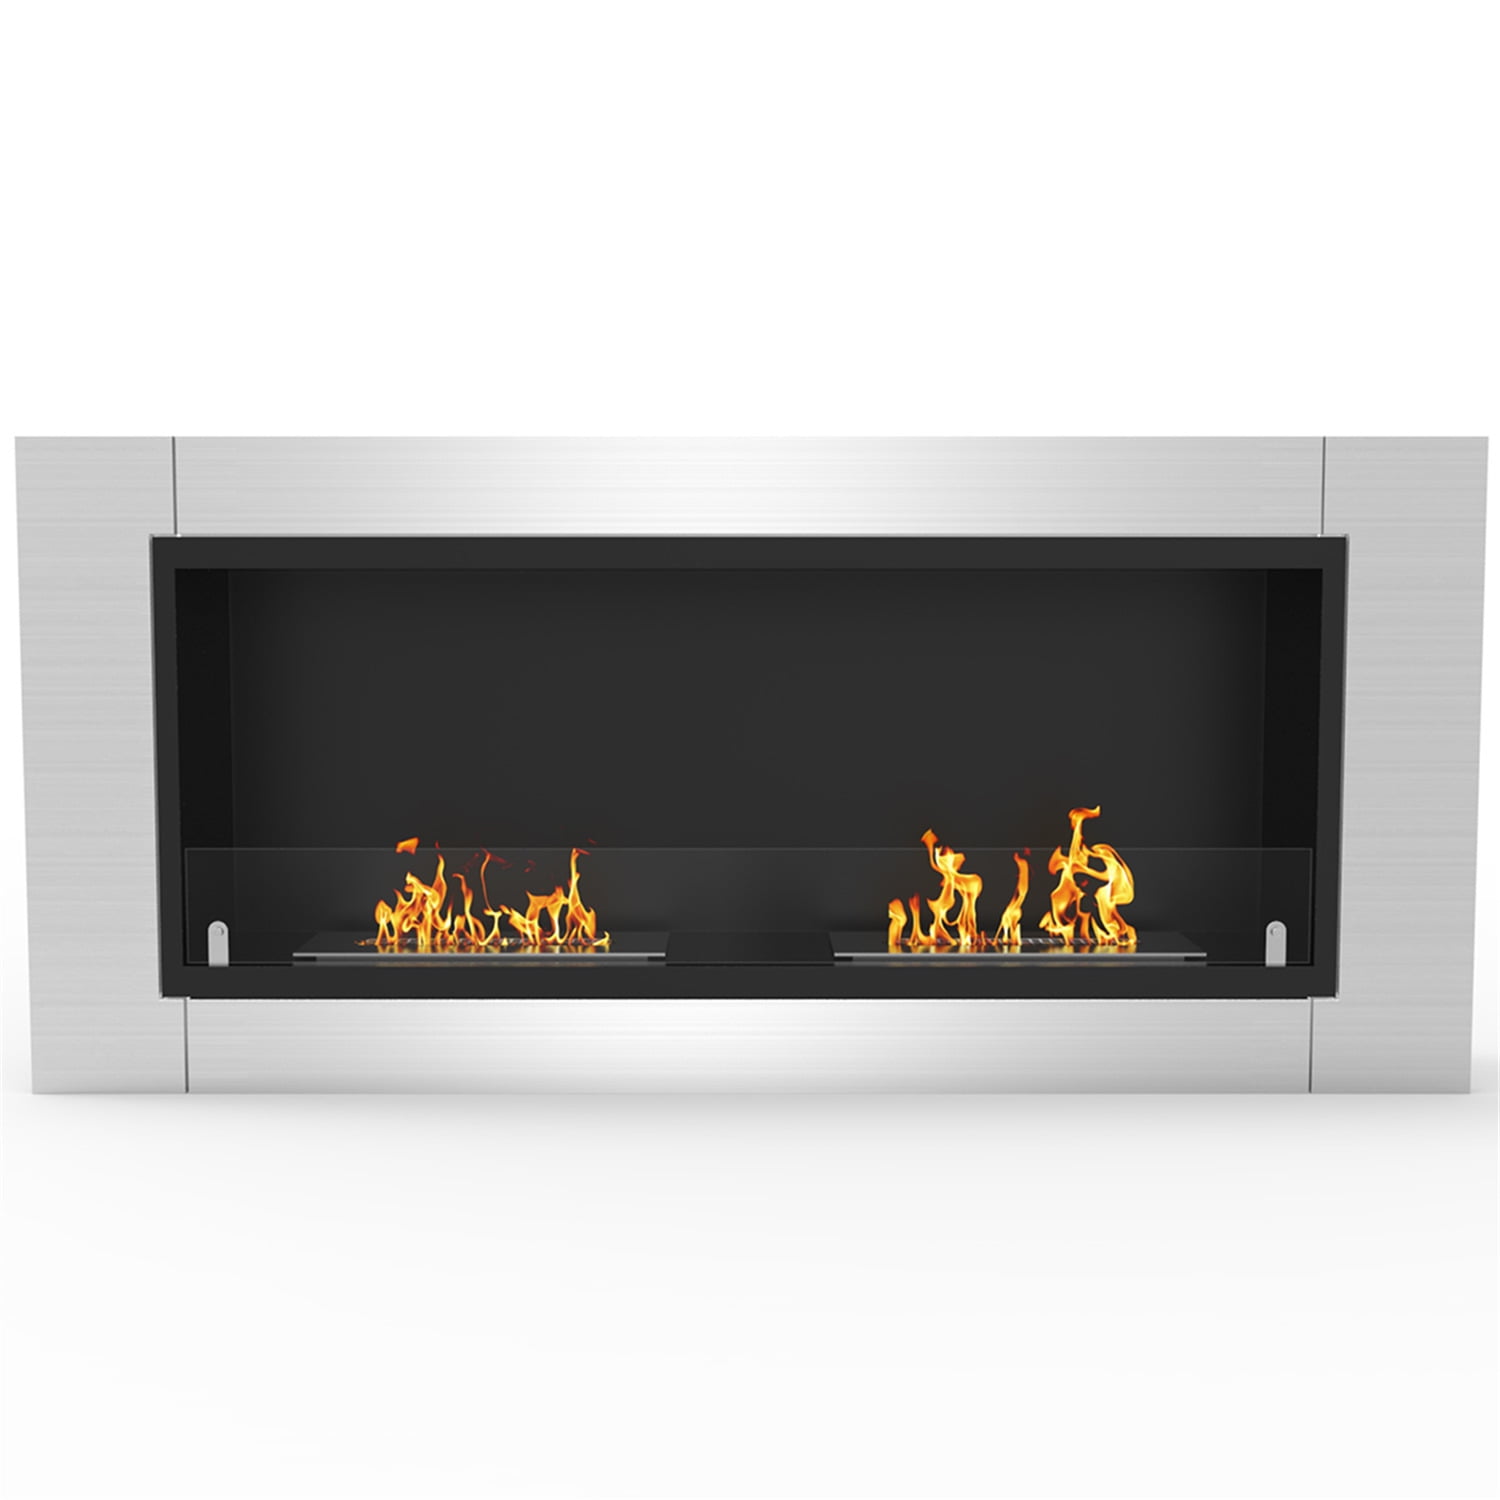 Regal Flame Elite Fargo 43 Inch Ventless Built In Recessed Bio Ethanol Wall Mounted Fireplace